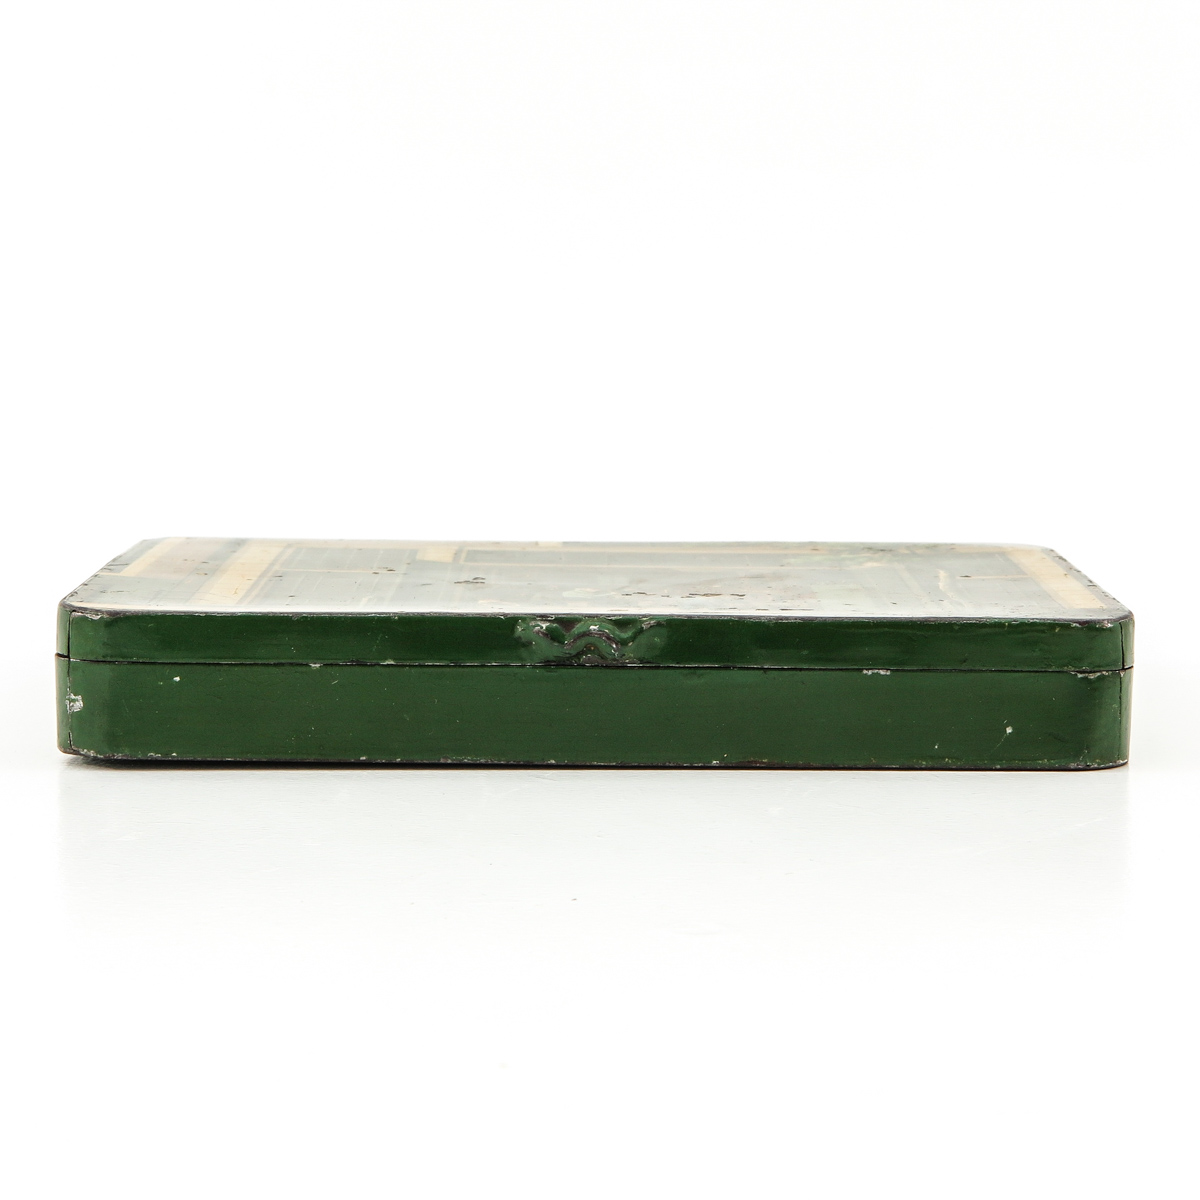 A 19th Century Painted Tin Tobacco Box - Image 2 of 9